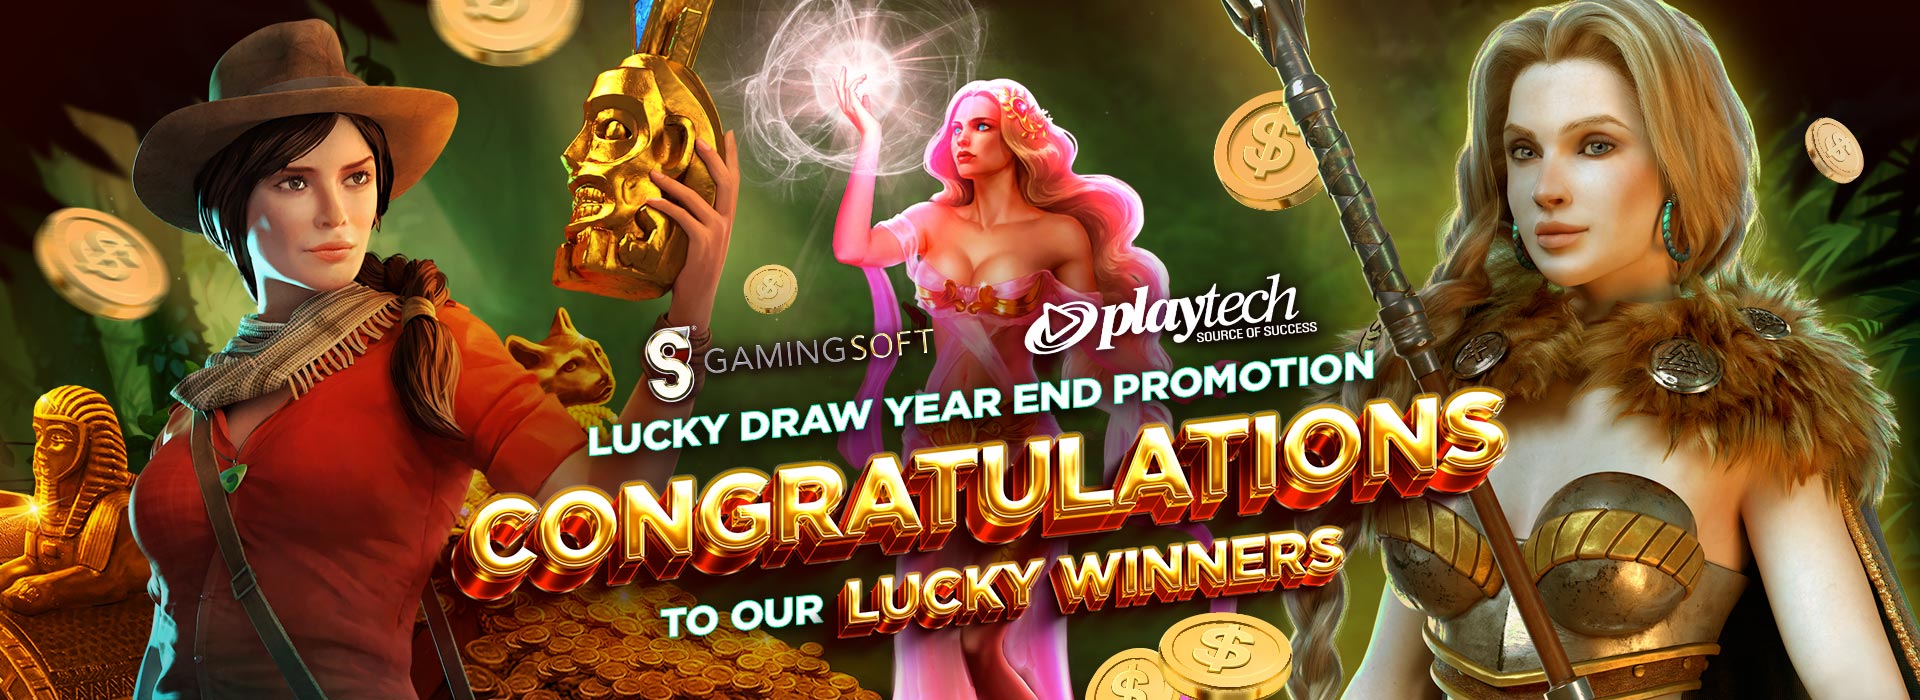 Congratulations! “GamingSoft - Playtech Lucky Draw Year End Promotion” Draw 1 Winner Announcement 